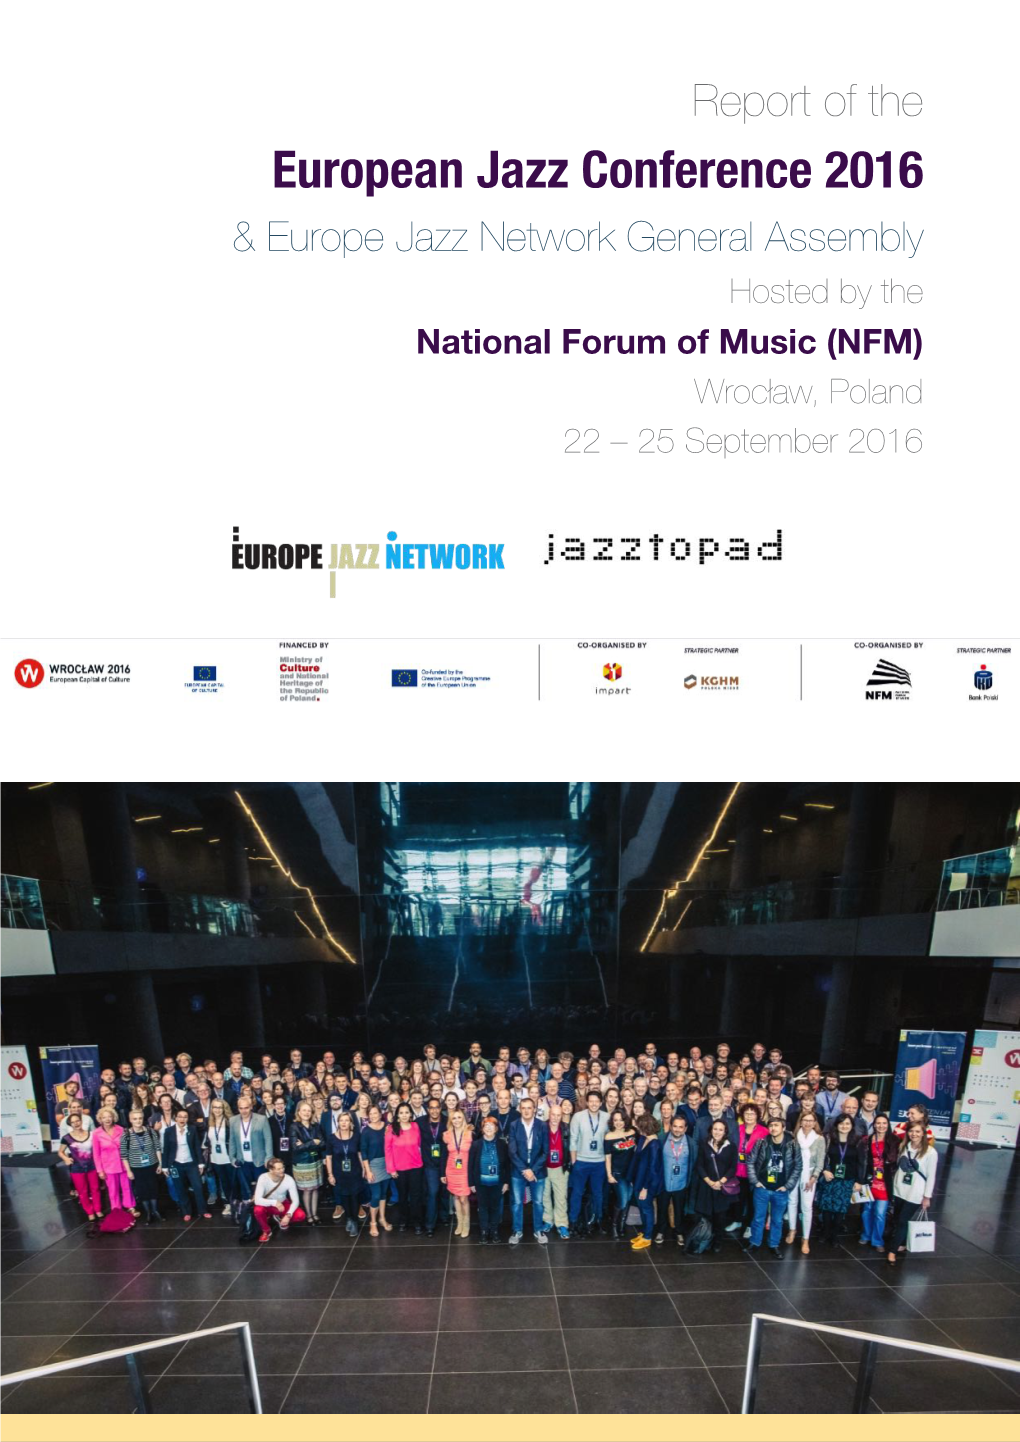 European Jazz Conference 2016 & Europe Jazz Network General Assembly Hosted by the National Forum of Music (NFM) Wrocław, Poland 22 – 25 September 2016